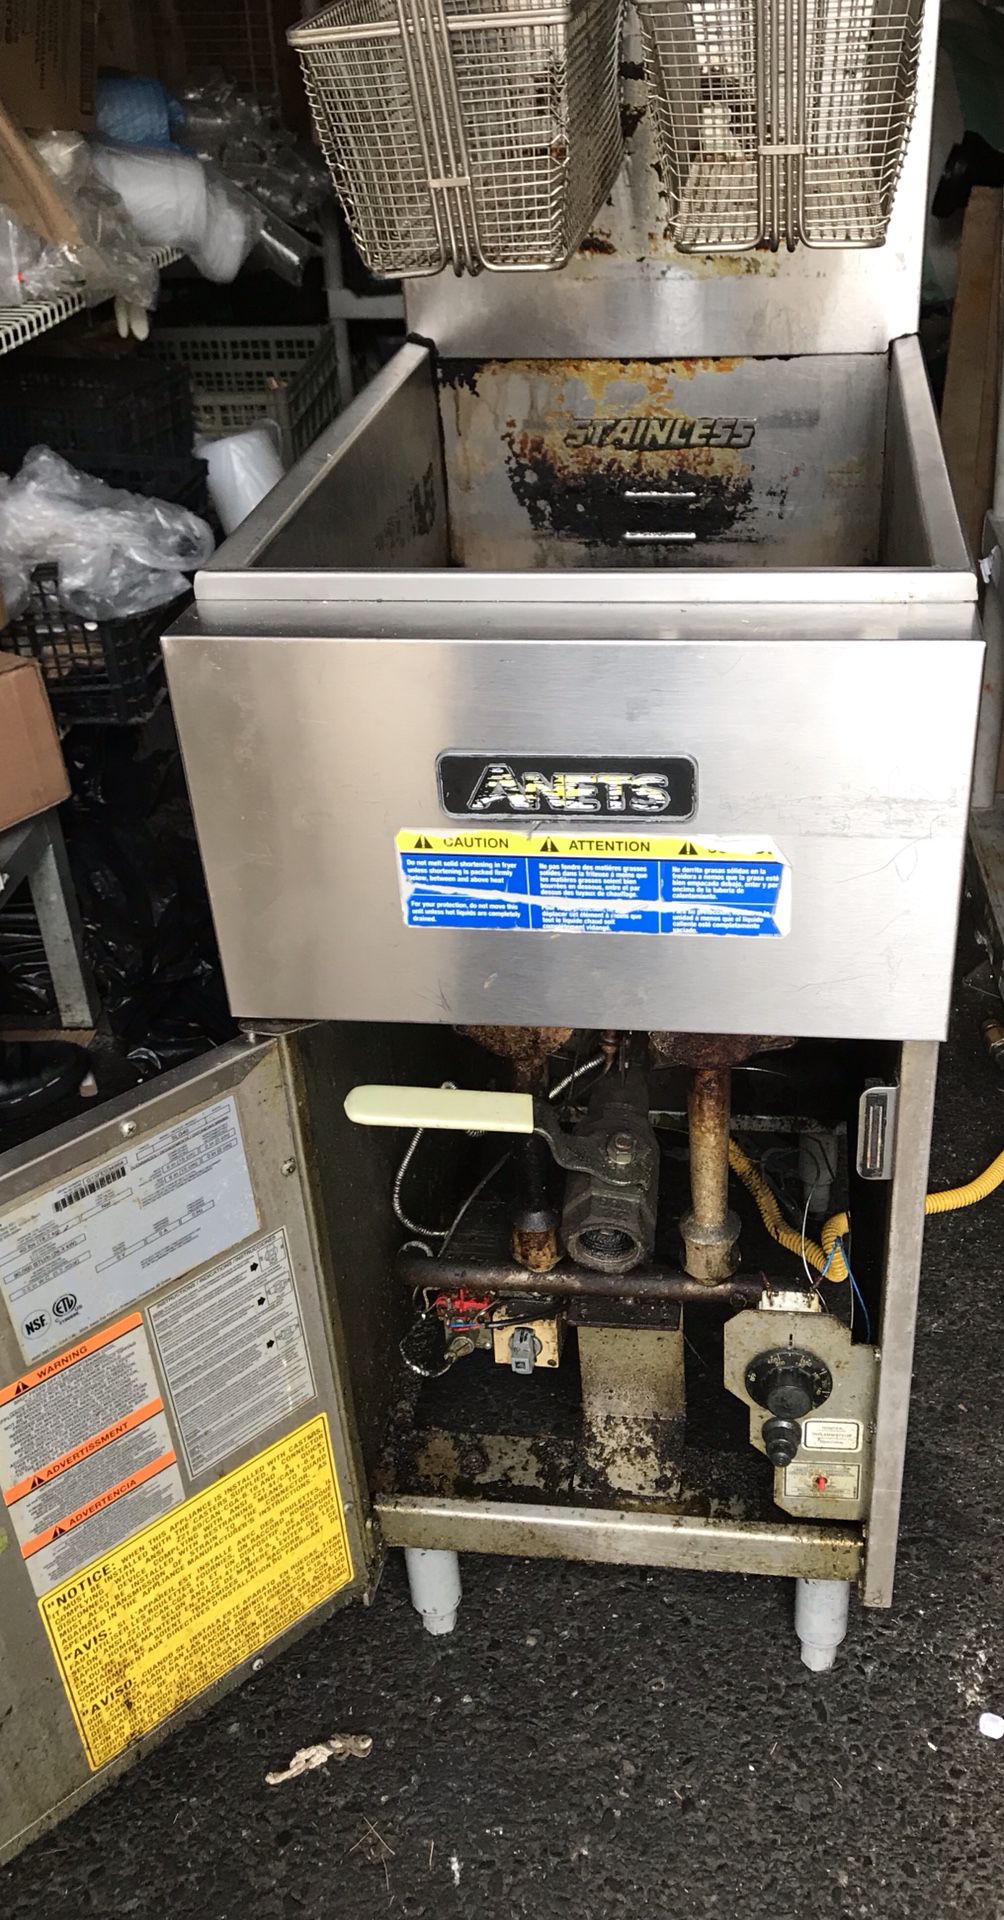 Anets slg40 commercial Floor standing gas deep fryer